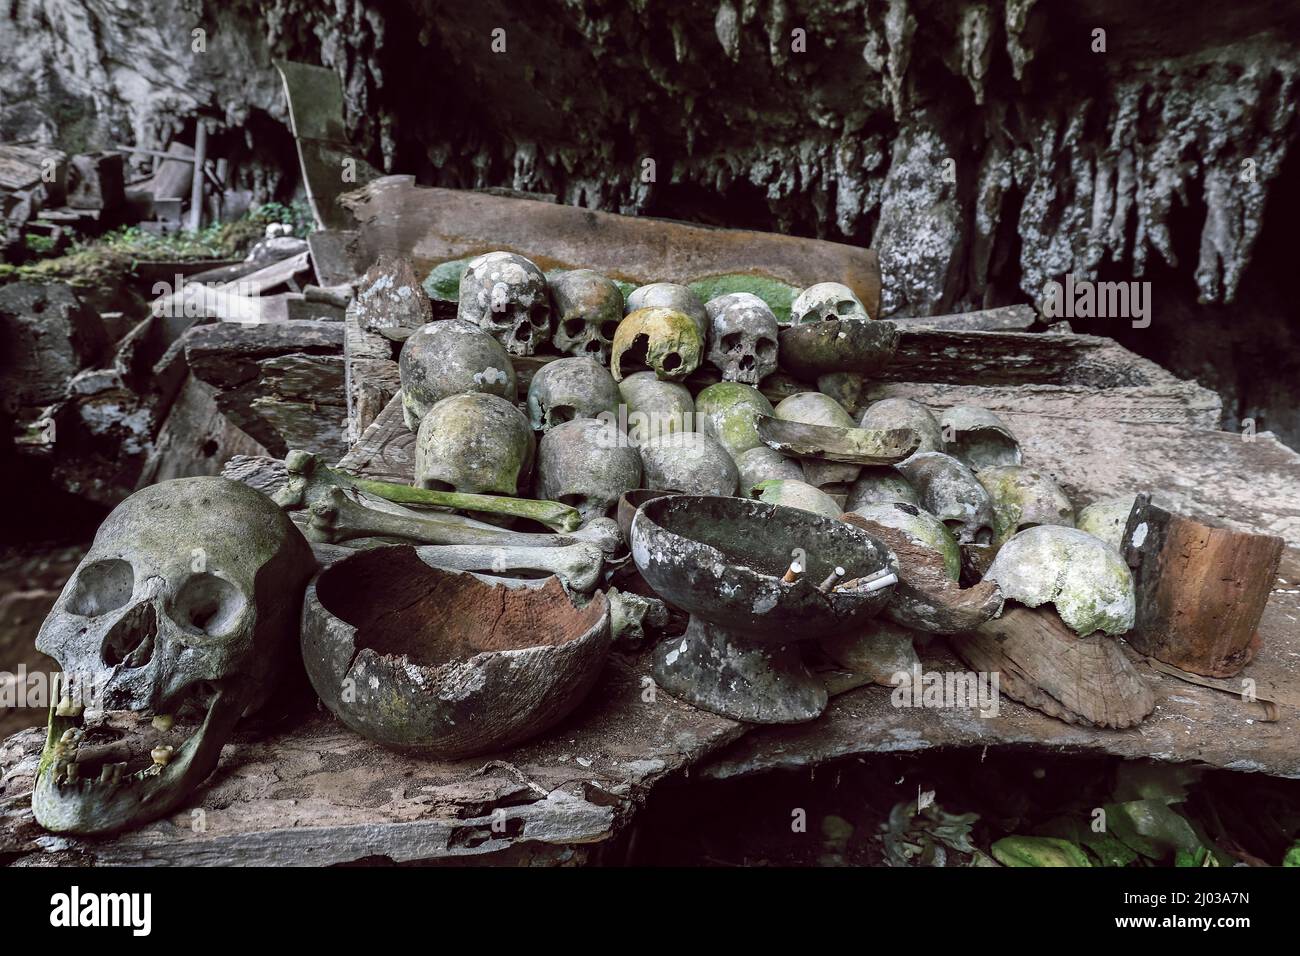 Skulls in 700 year old burial cave at Lombok Parinding, north of Rantepao, Lombok Parinding, Toraja, South Sulawesi, Indonesia, Southeast Asia, Asia Stock Photo